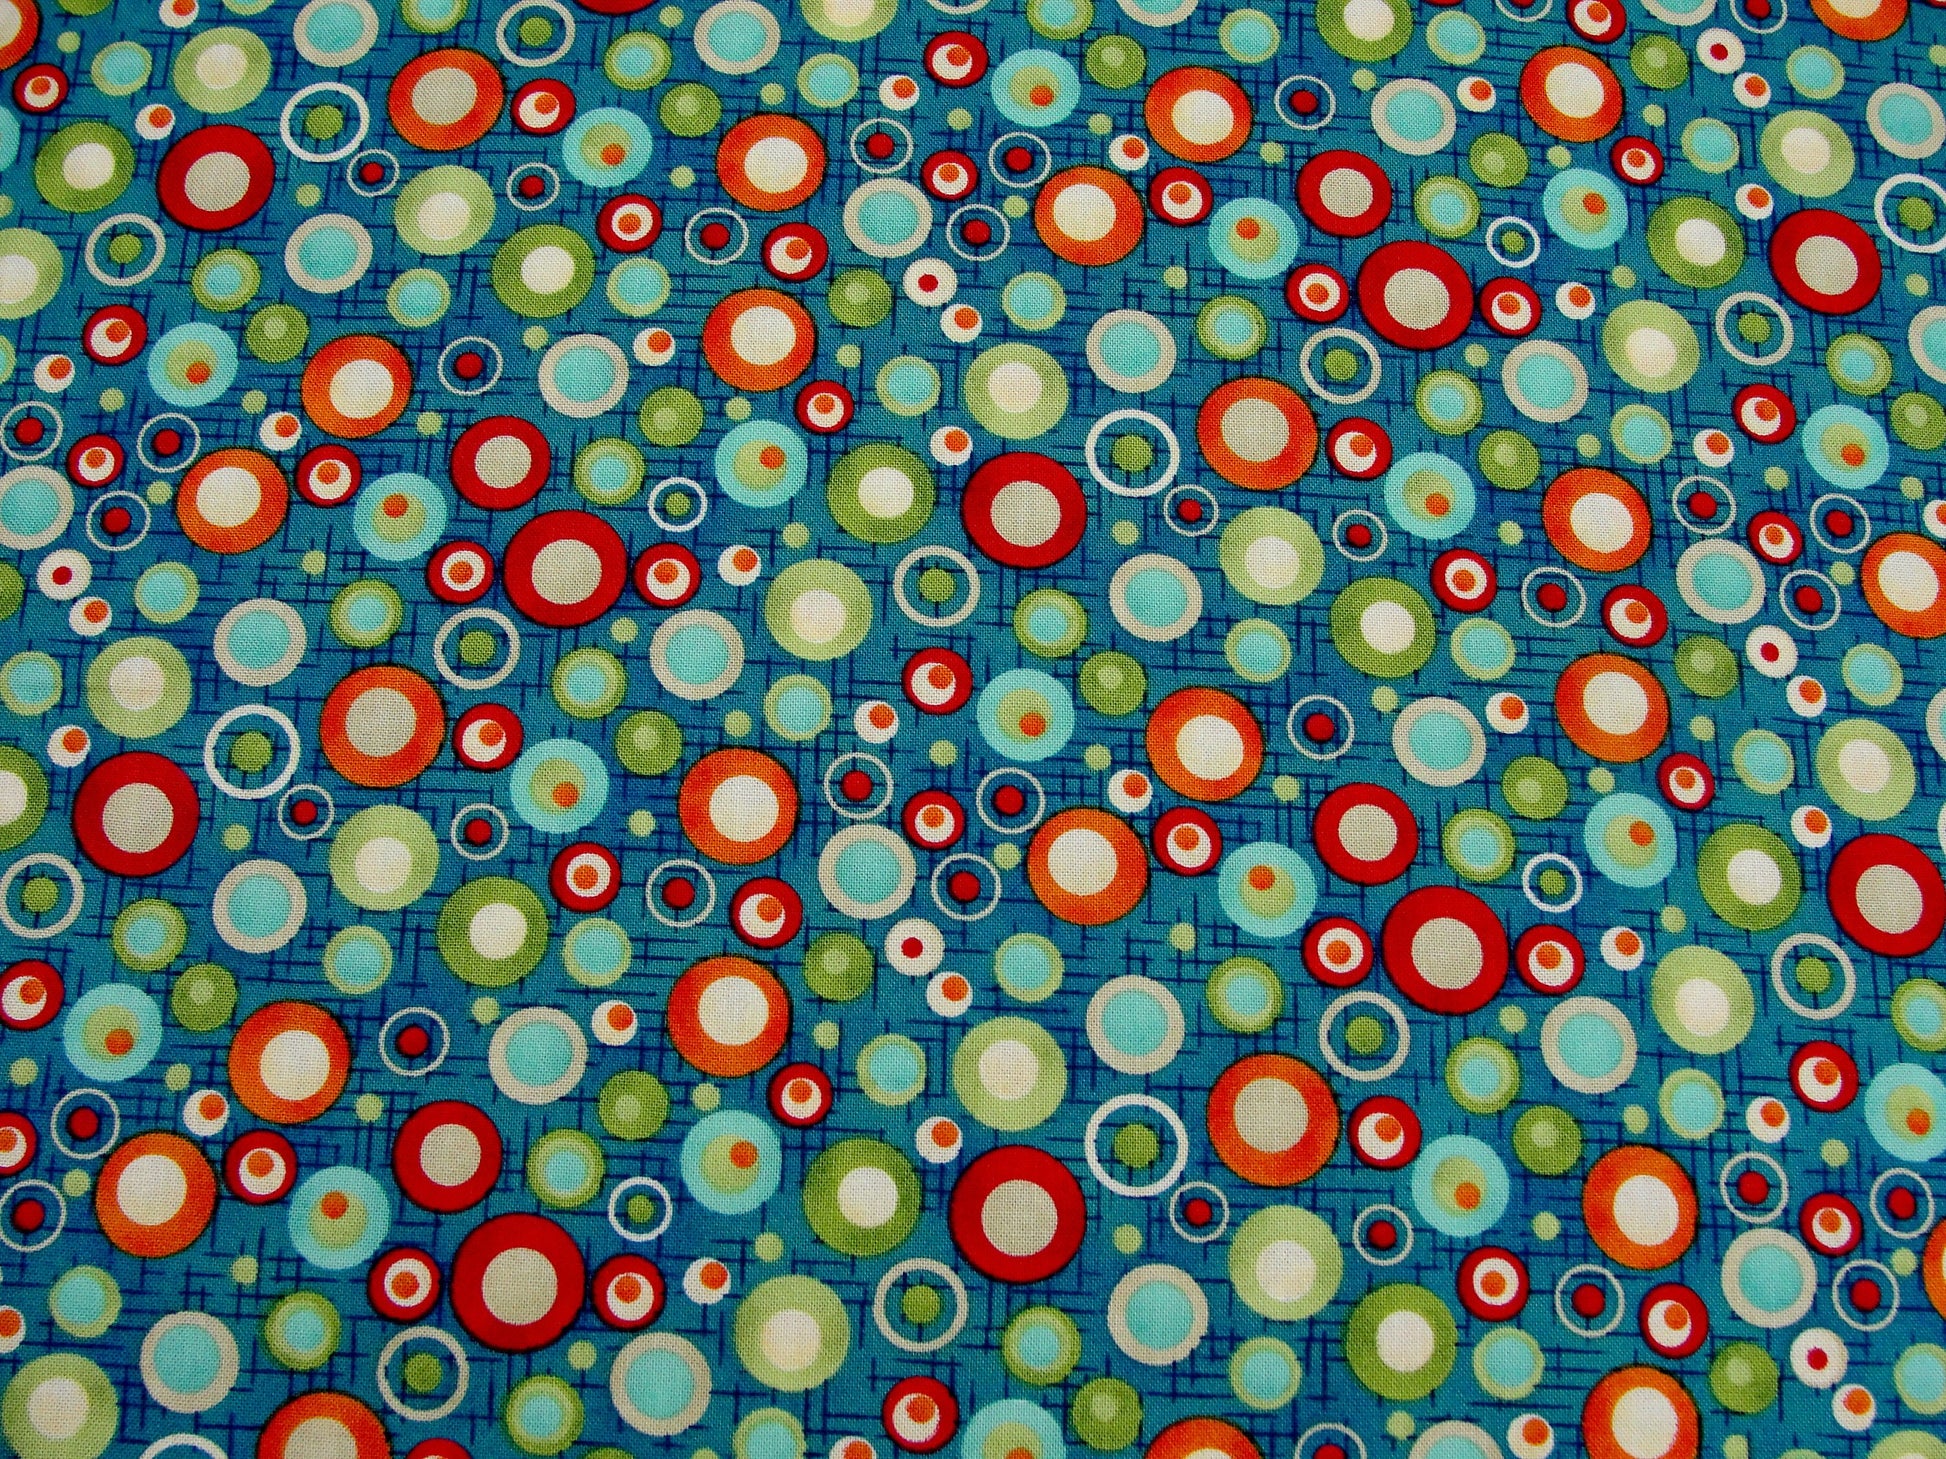 Doodle Days Calendar dots on turquoise fabric by Henry Glass yardage - Fabric - Craft Supply House